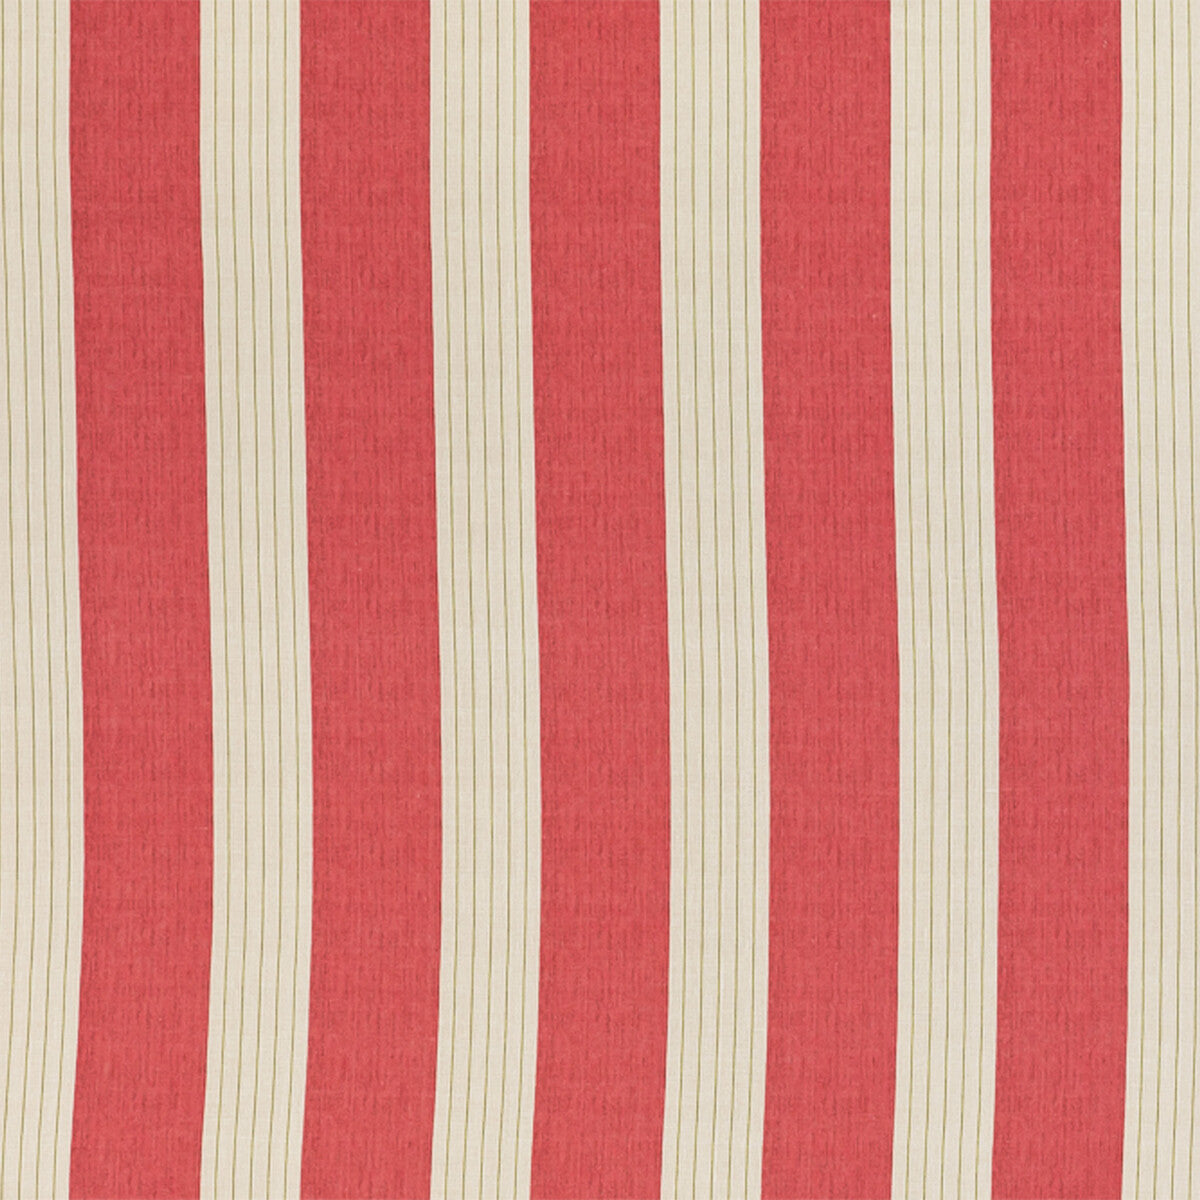 Lambert Stripe fabric in red color - pattern BFC-3697.19.0 - by Lee Jofa in the Blithfield collection